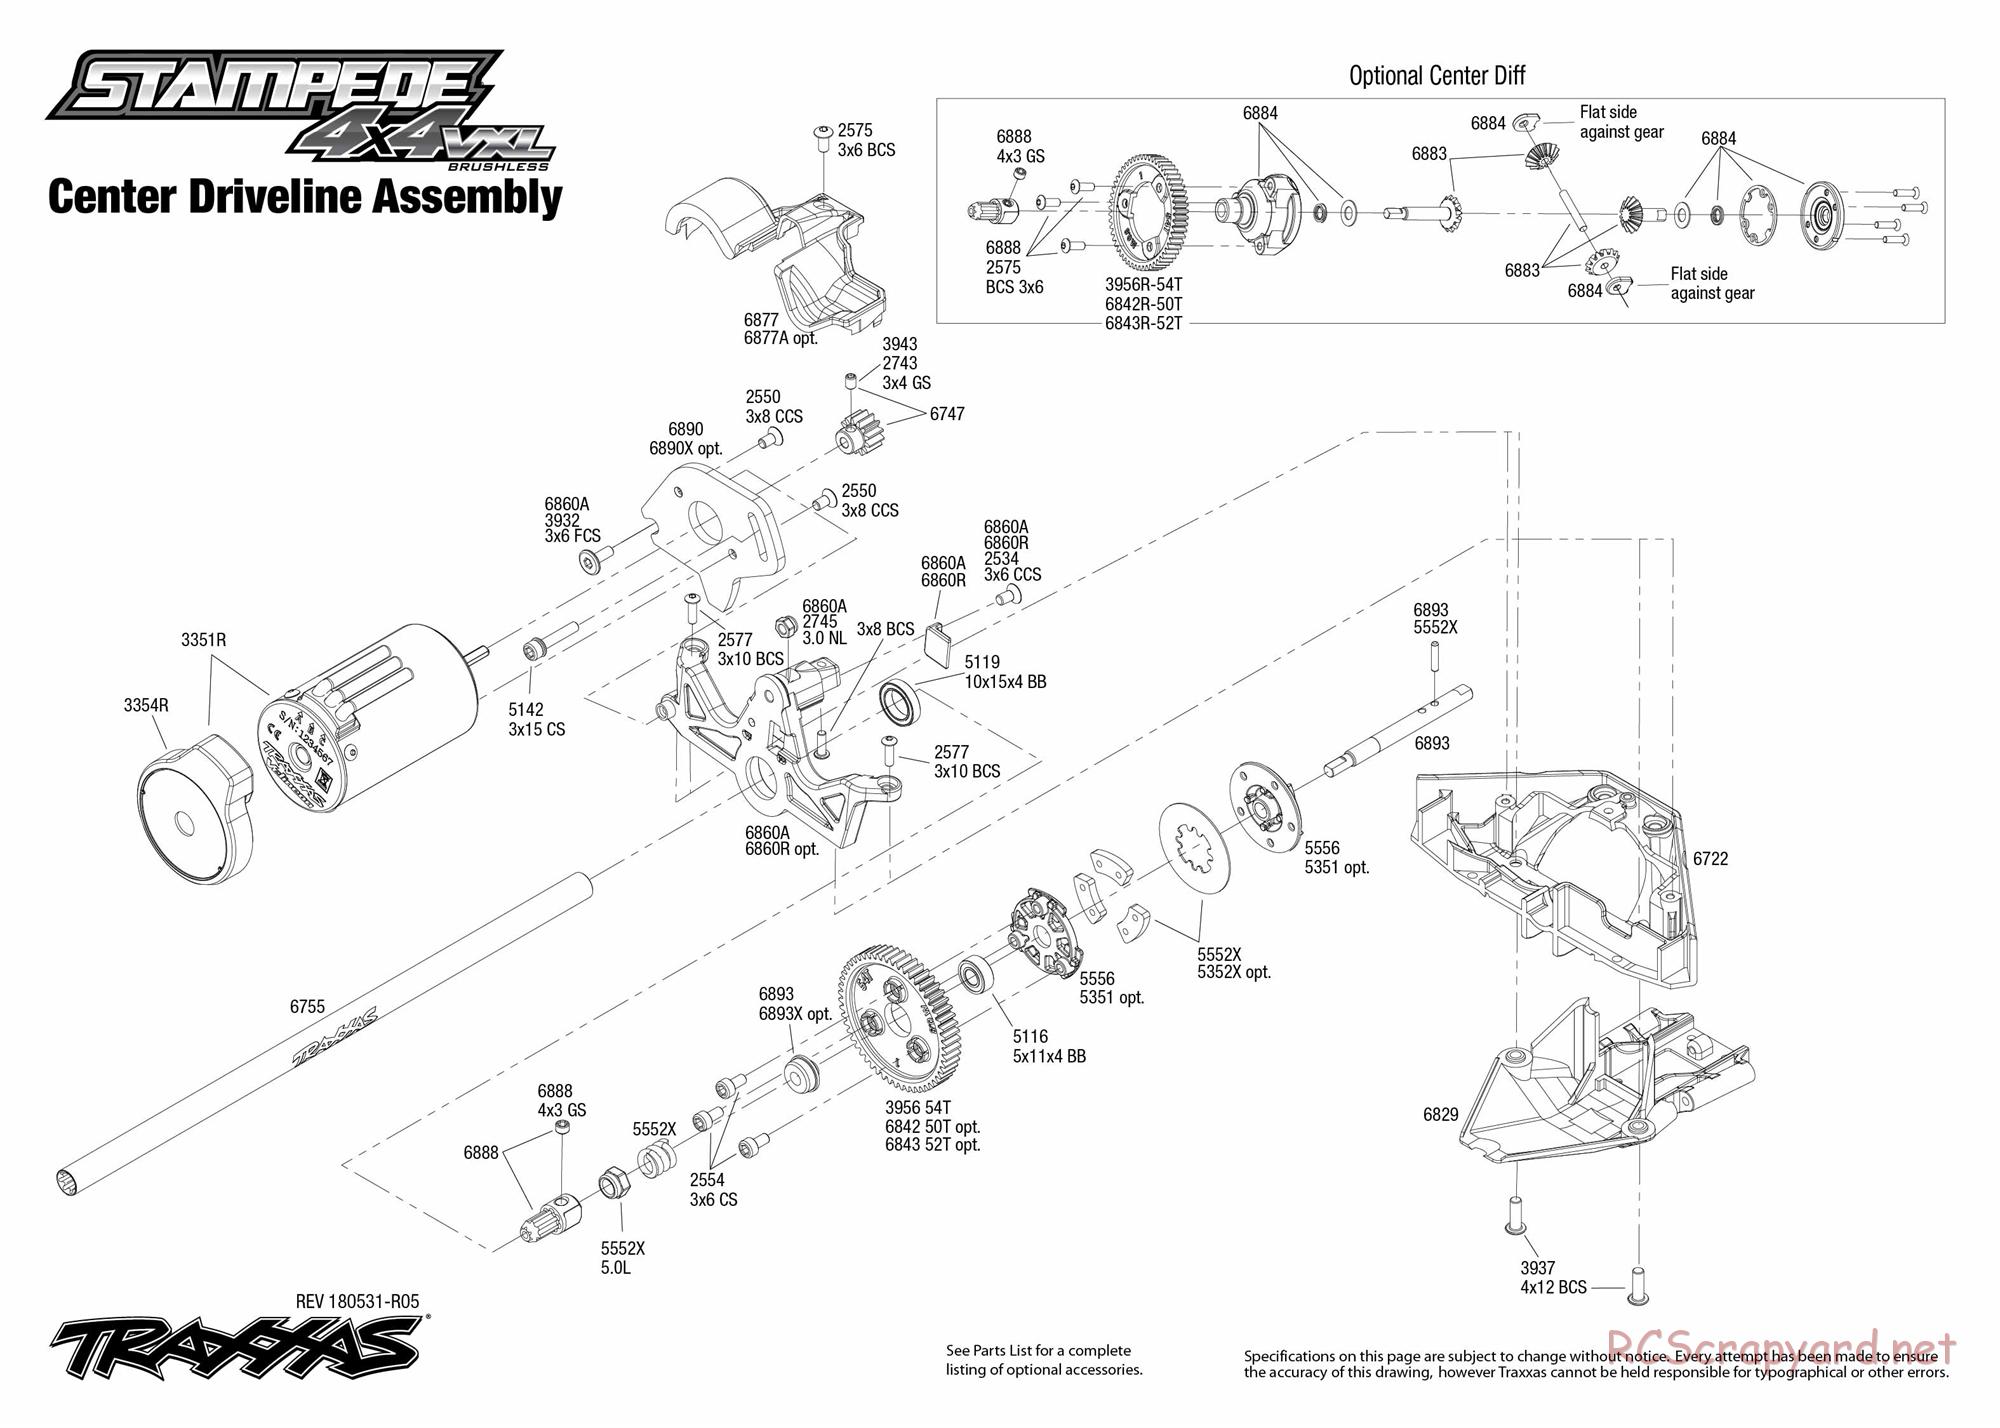 Traxxas - Stampede 4x4 VXL TSM (2015) - Exploded Views - Page 5